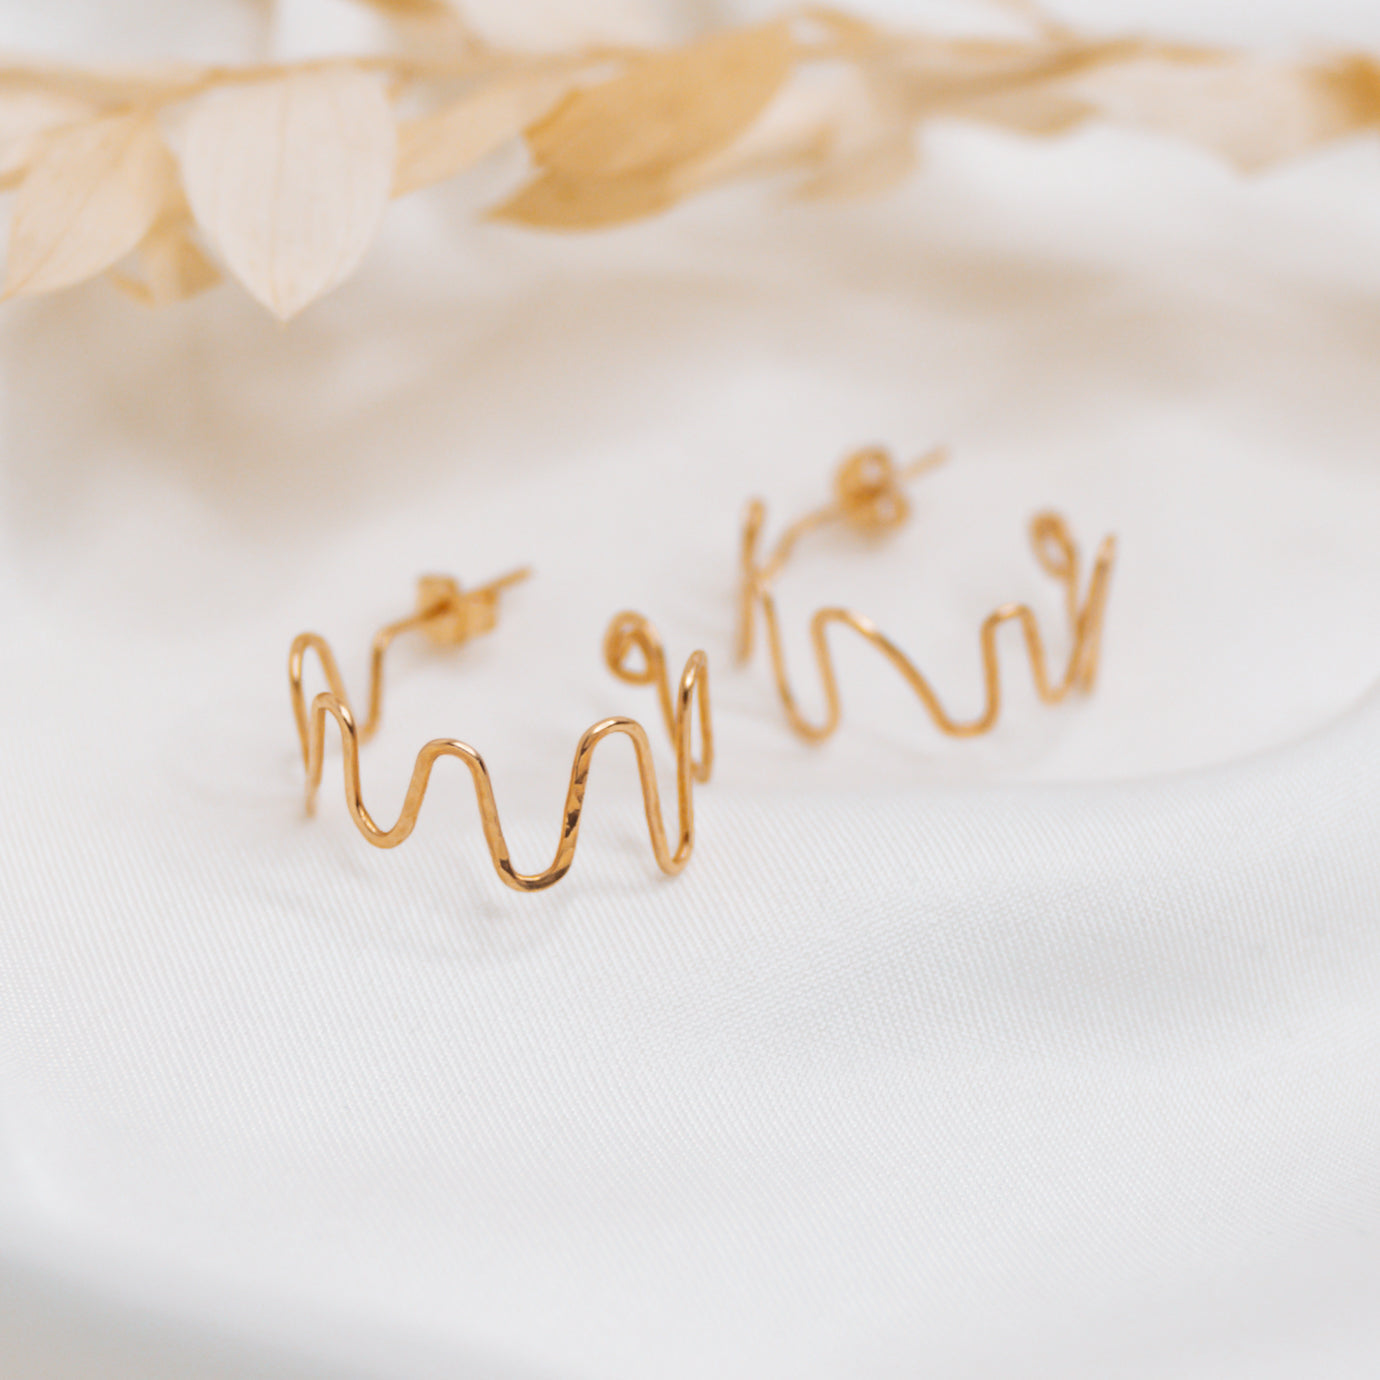 Gold Filled Whirl Hoops